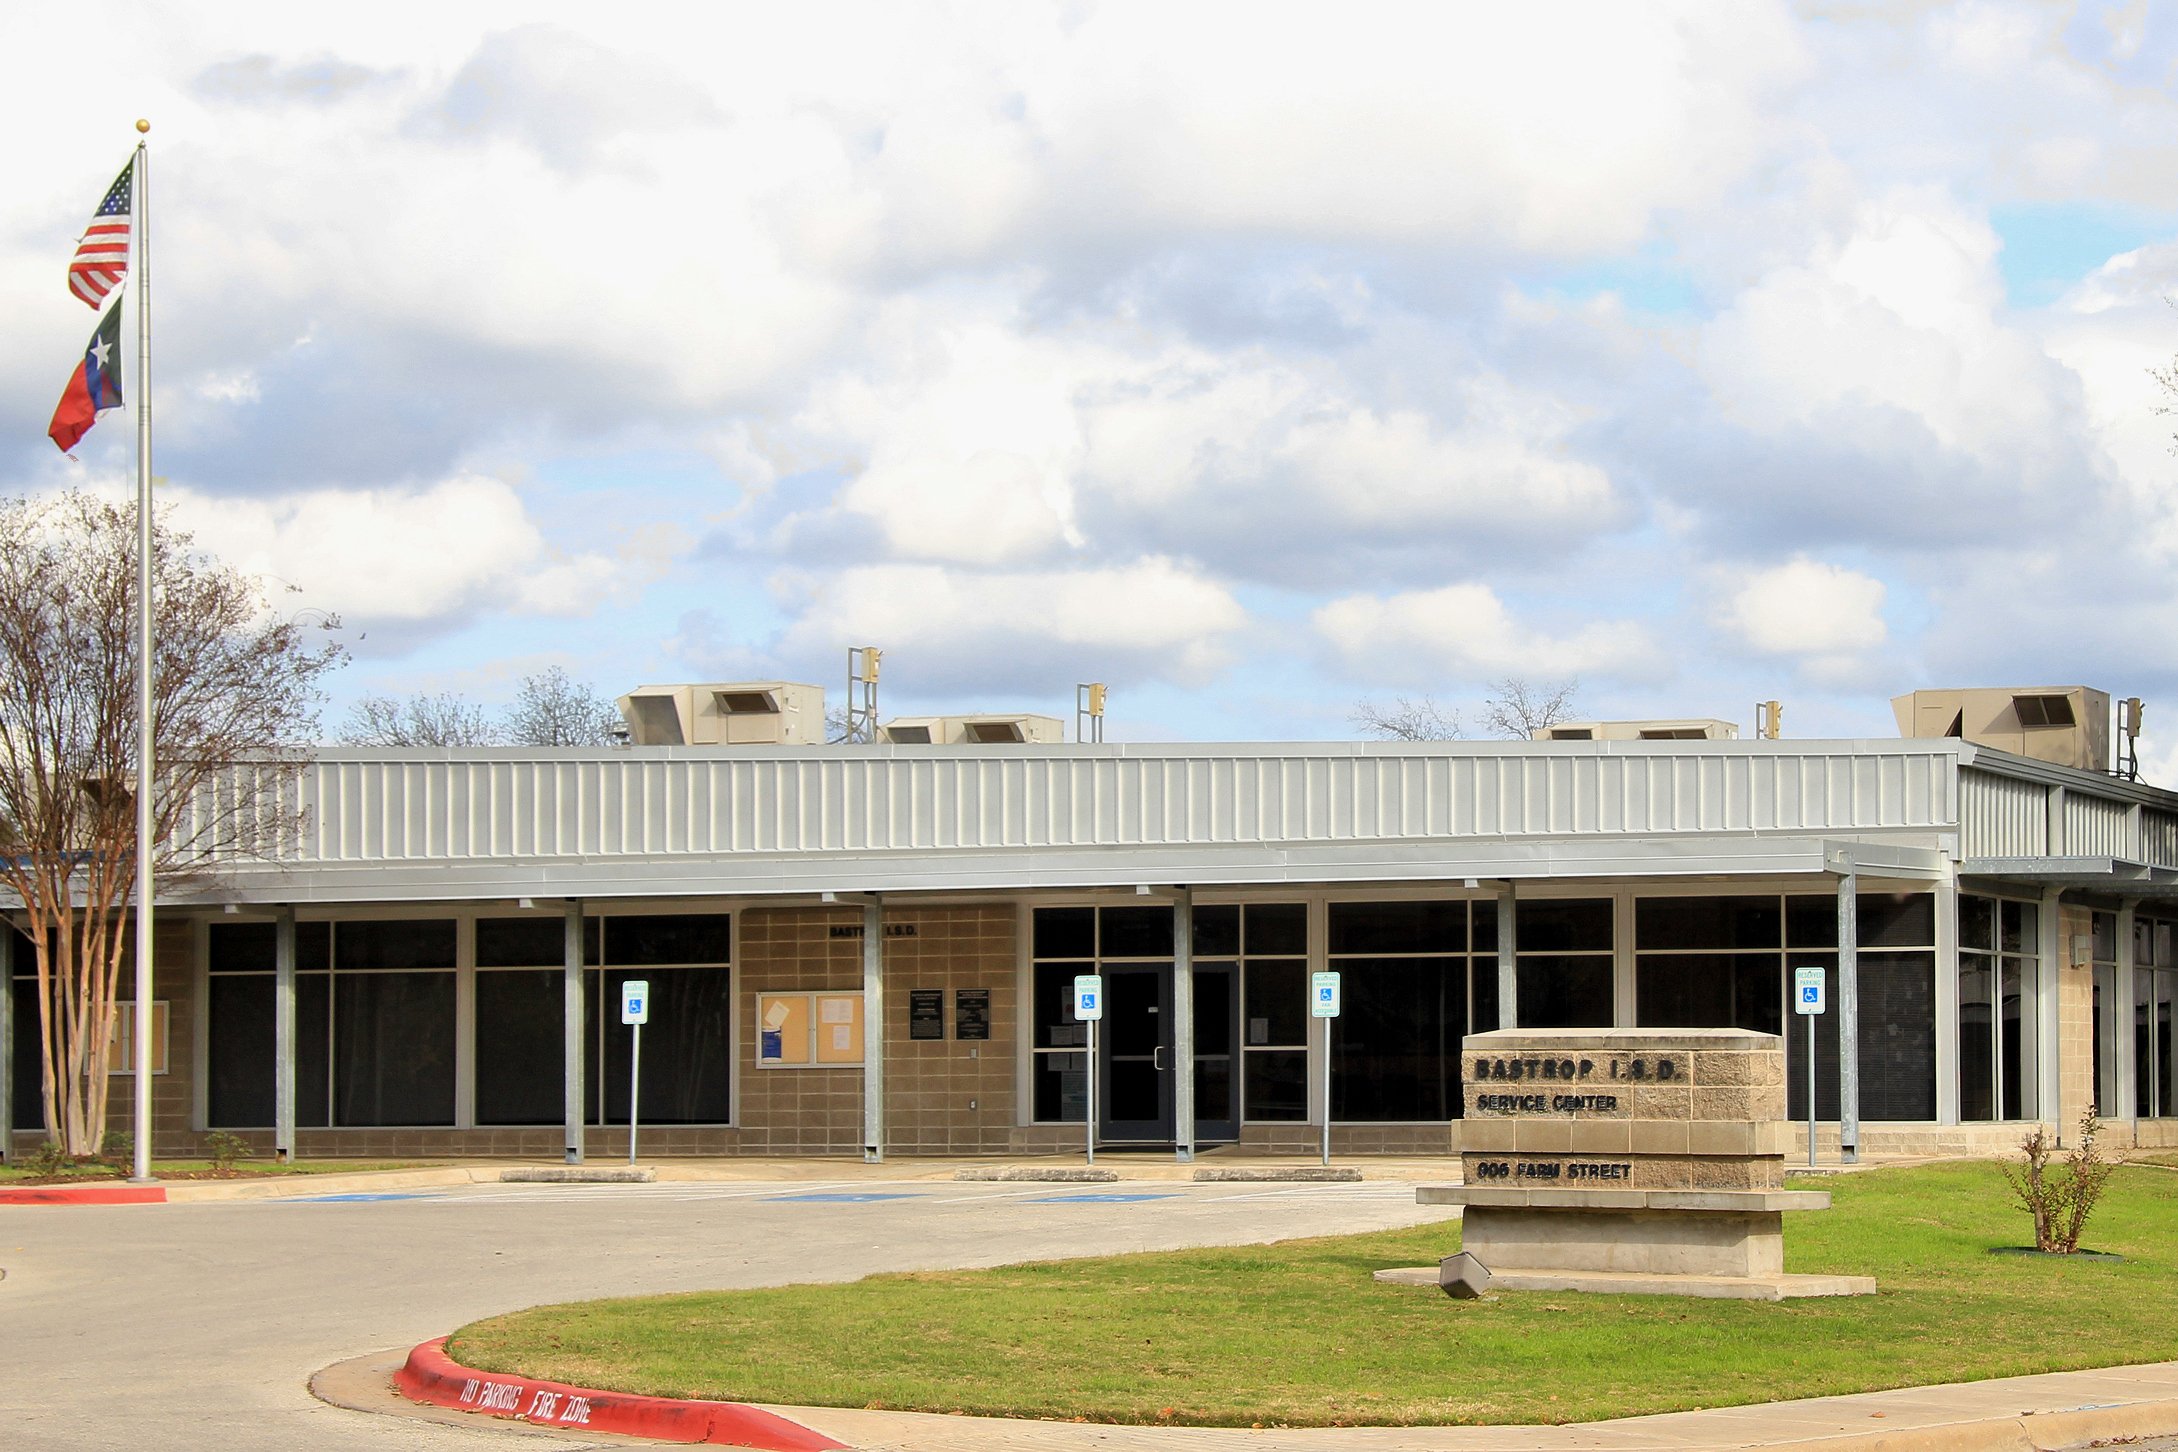 How to Move From RTI to MTSS — Lessons from District Leaders at Bastrop ISD